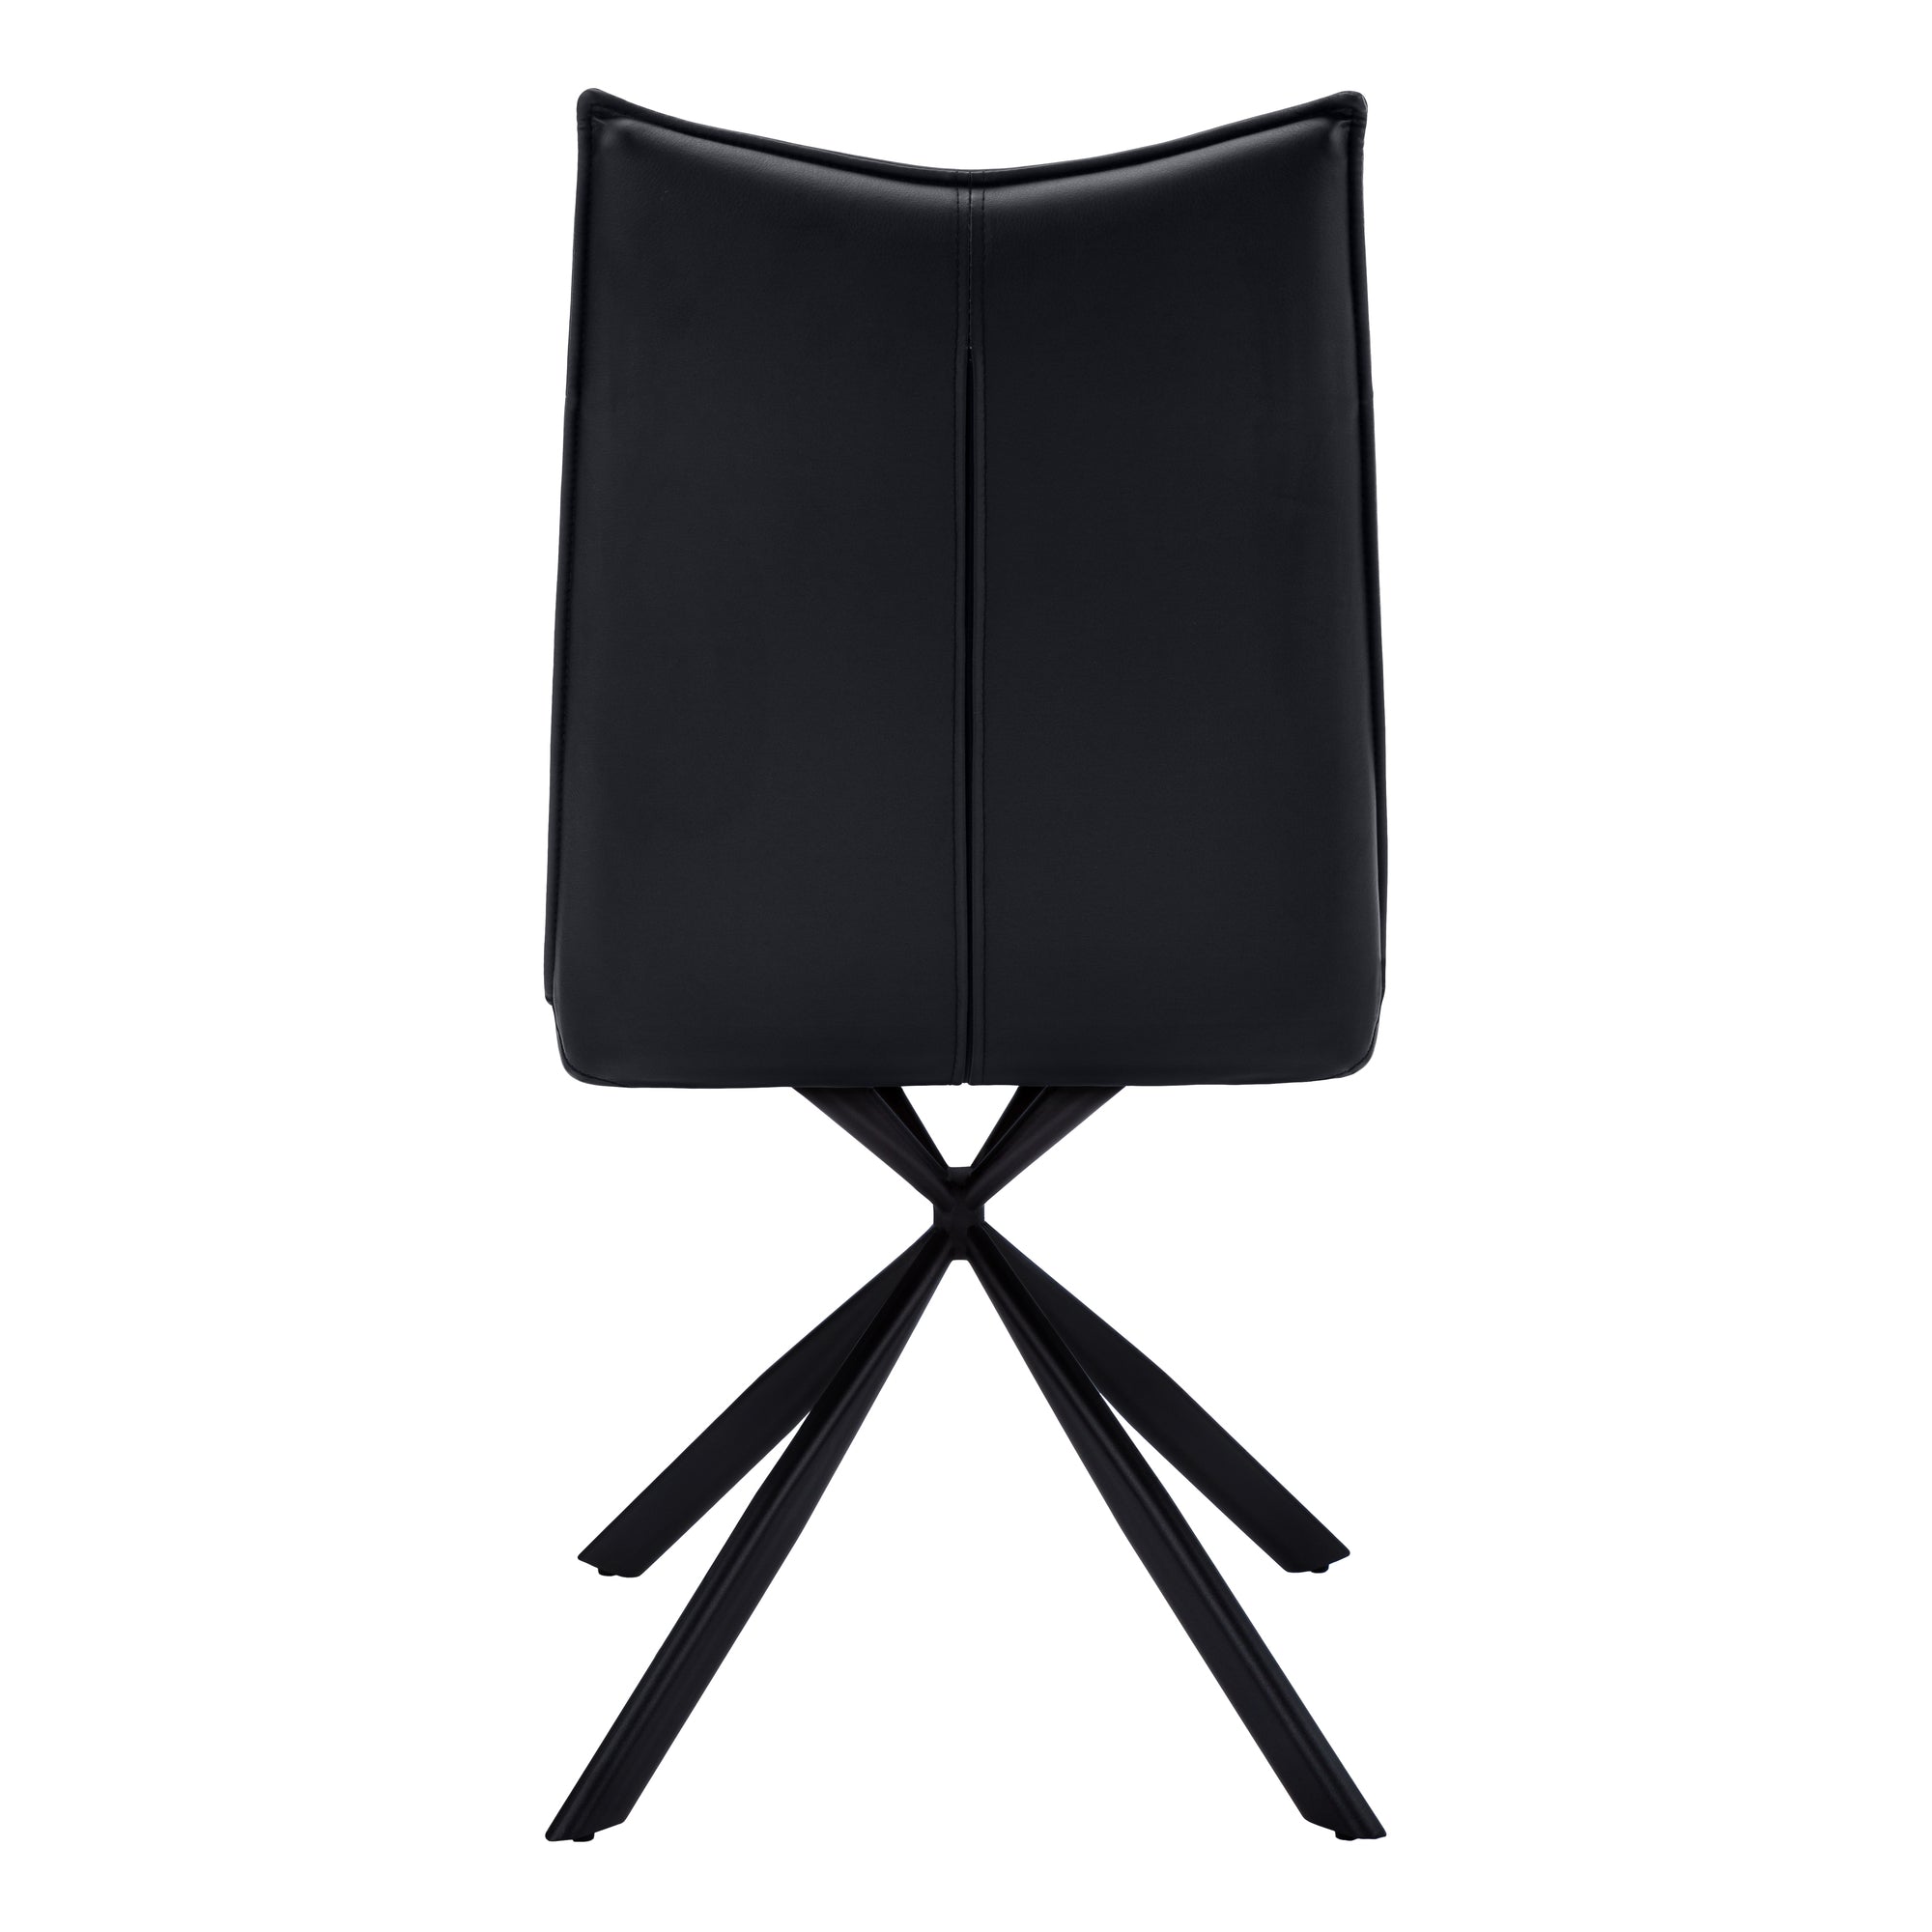 MN-941215    Dining Chair, Set Of 2, Side, Pu Leather-Look, Upholstered, Metal Legs, Kitchen, Dining Room, Leather Look, Metal Legs, Black, Contemporary, Modern